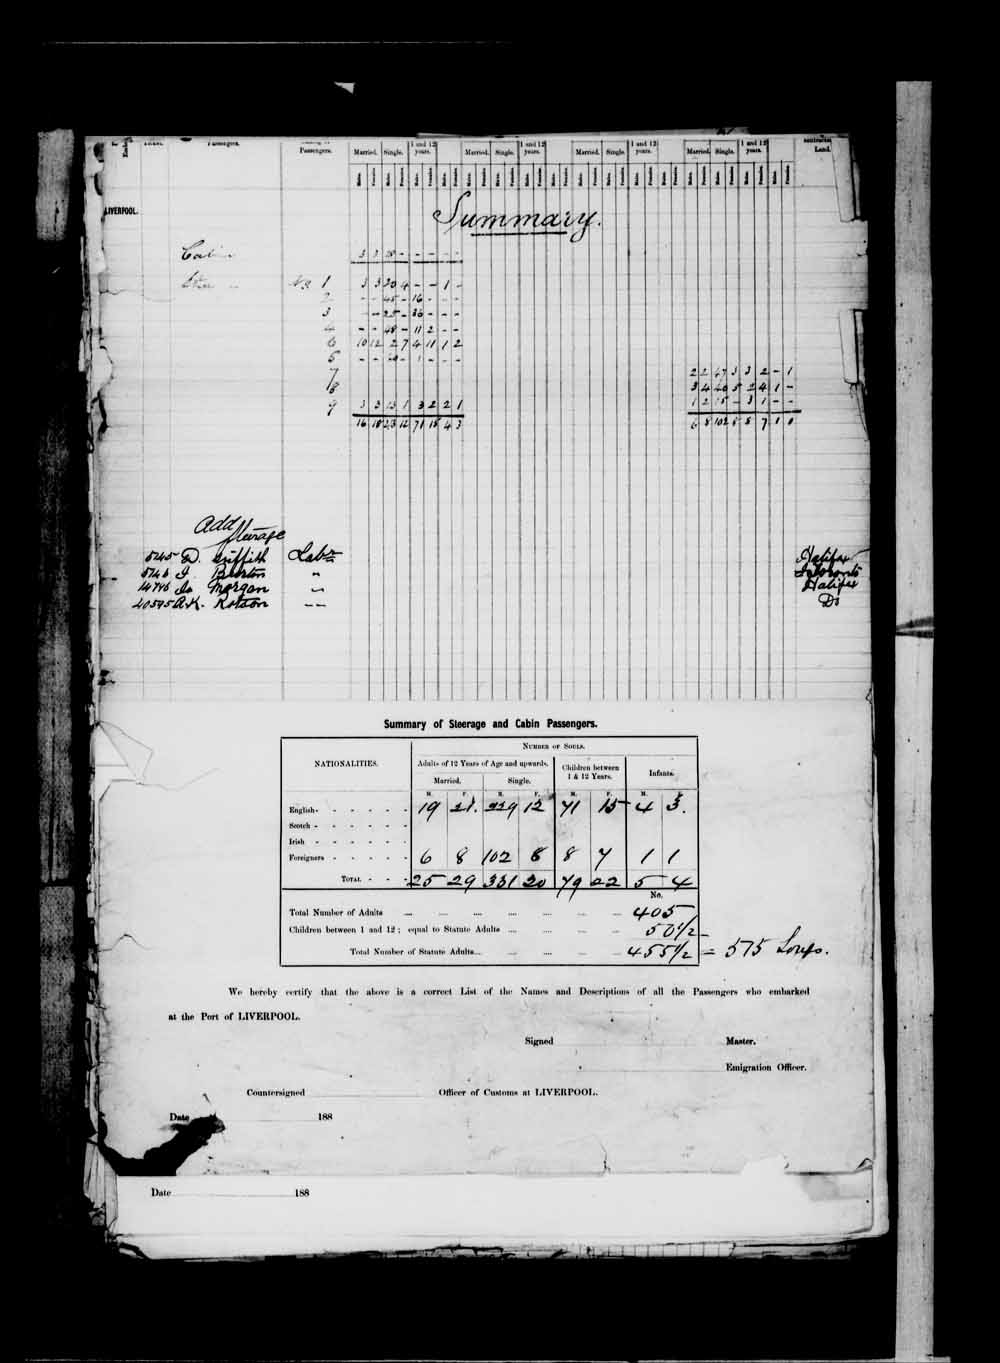 Digitized page of Passenger Lists for Image No.: e003674497